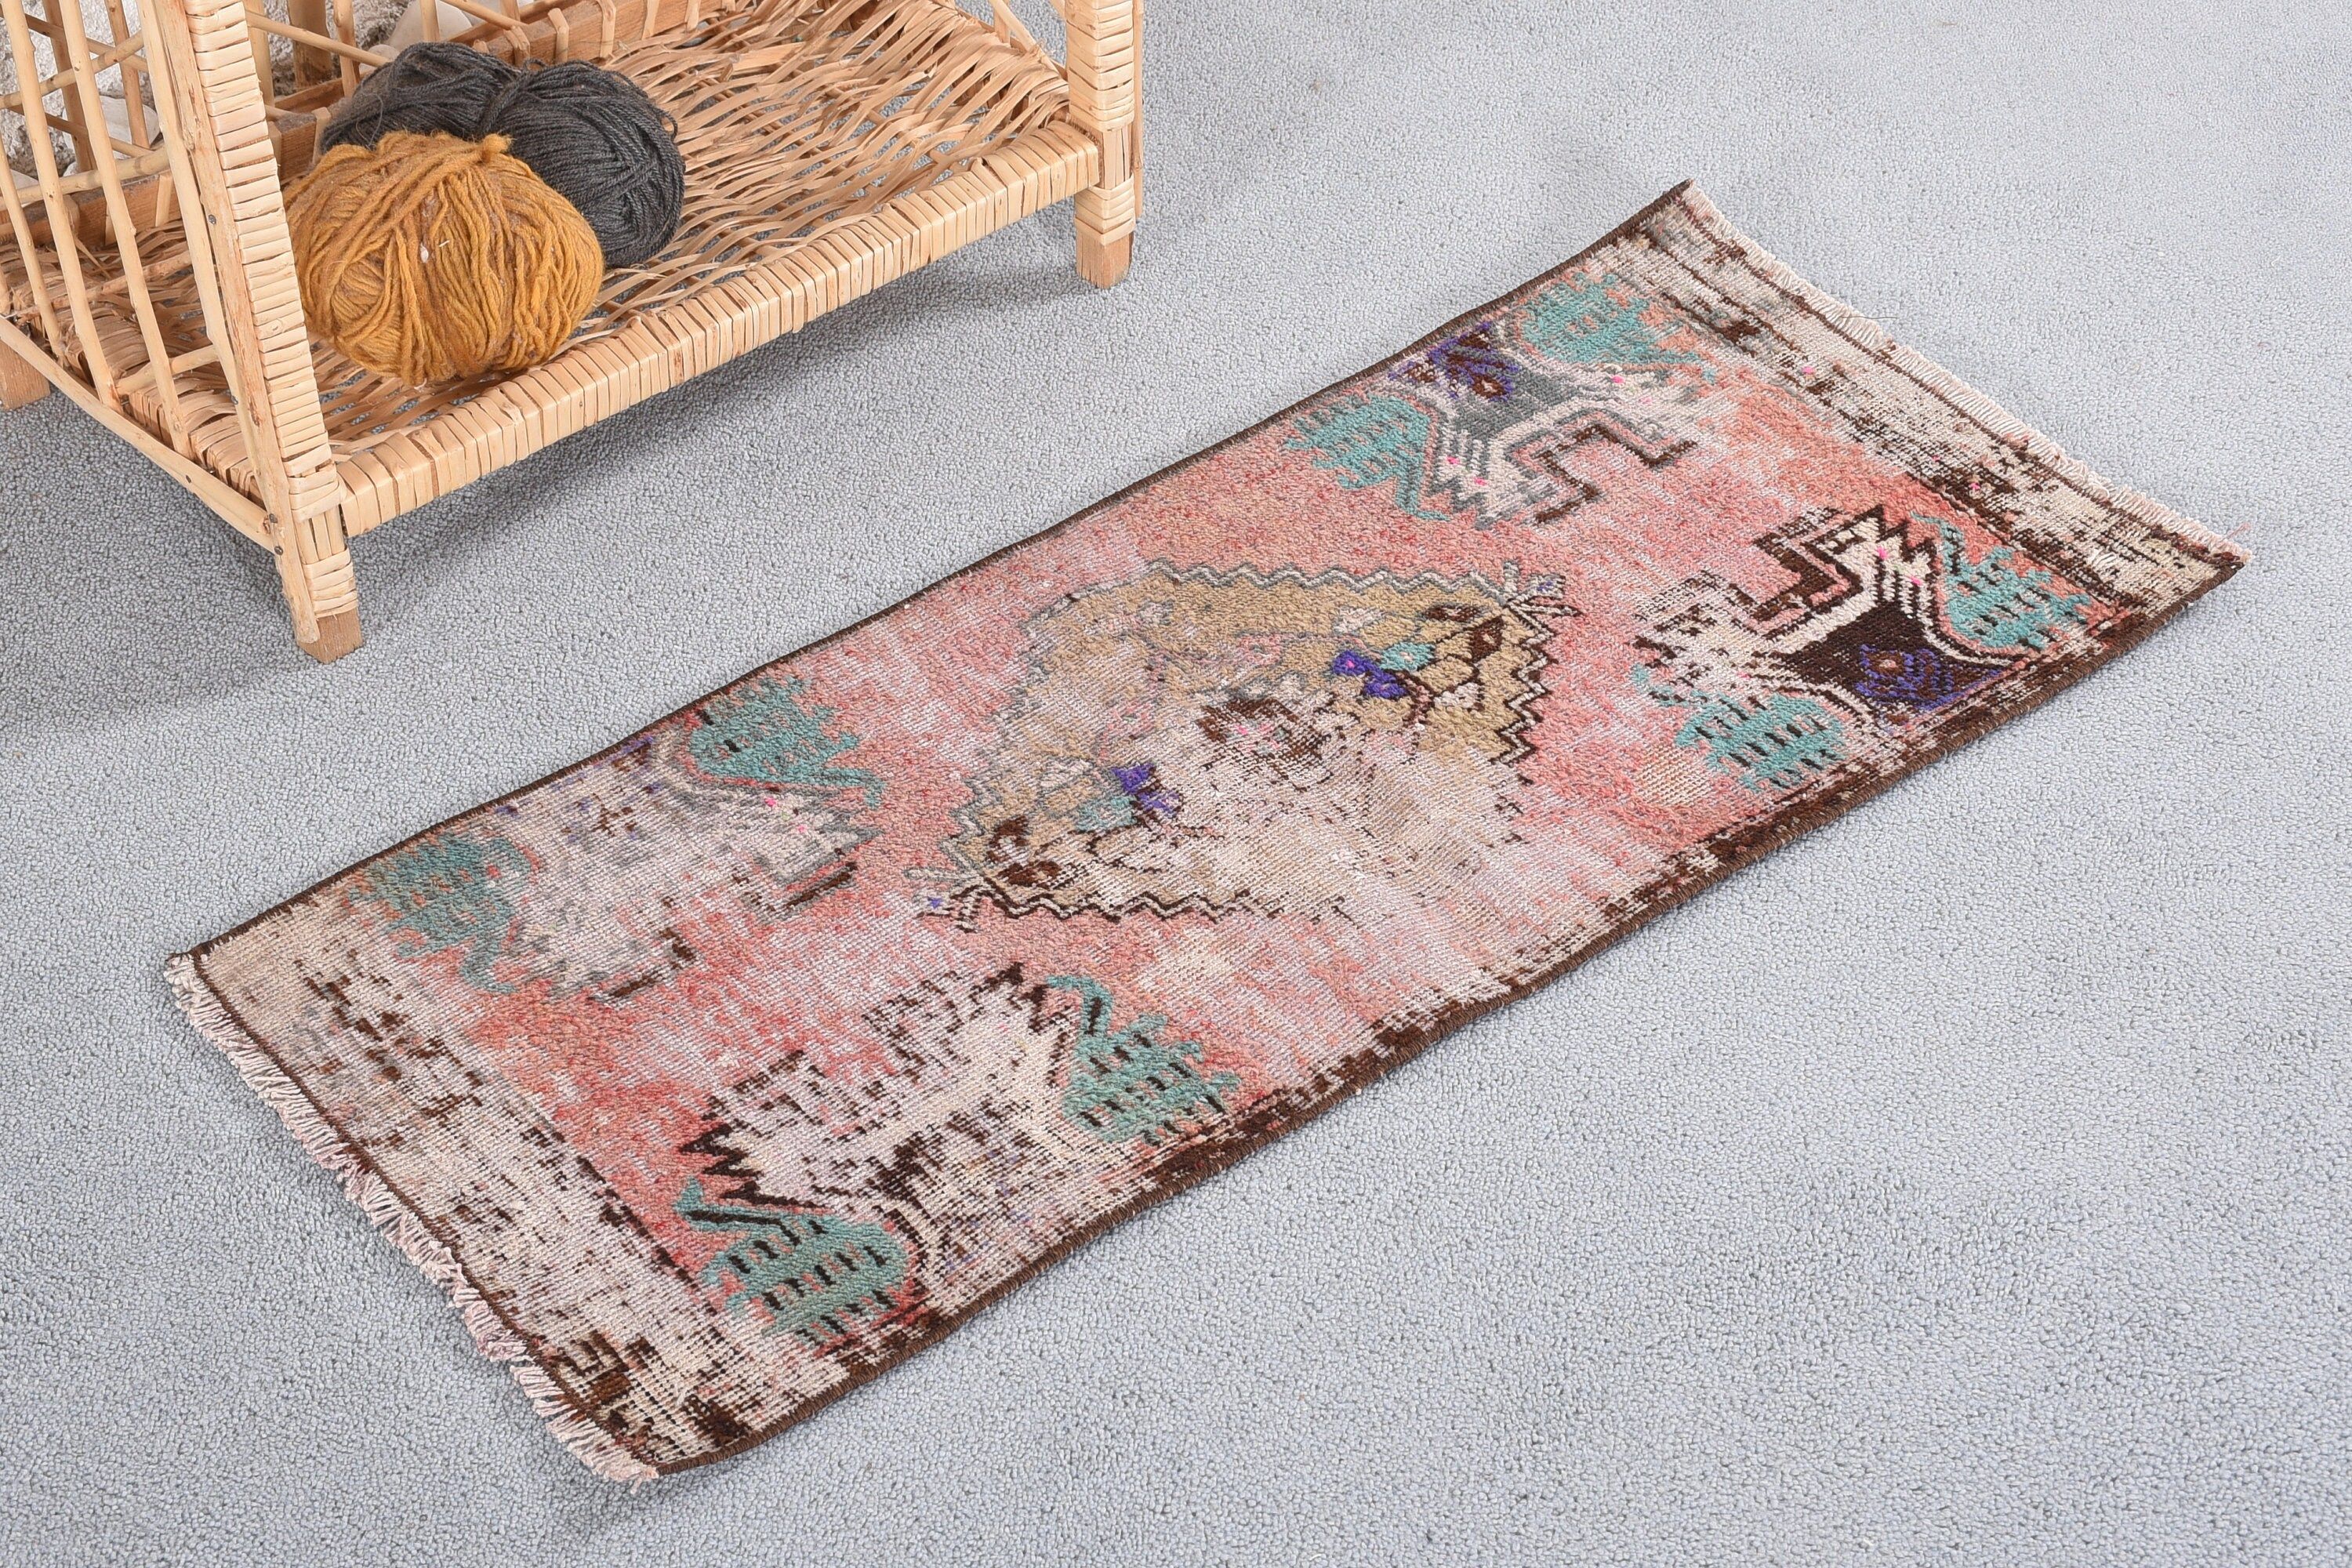 Cool Rug, Vintage Rugs, 1.2x2.9 ft Small Rugs, Car Mat Rugs, Rugs for Entry, Bath Rug, Turkish Rugs, Brown Oushak Rugs, Moroccan Rug